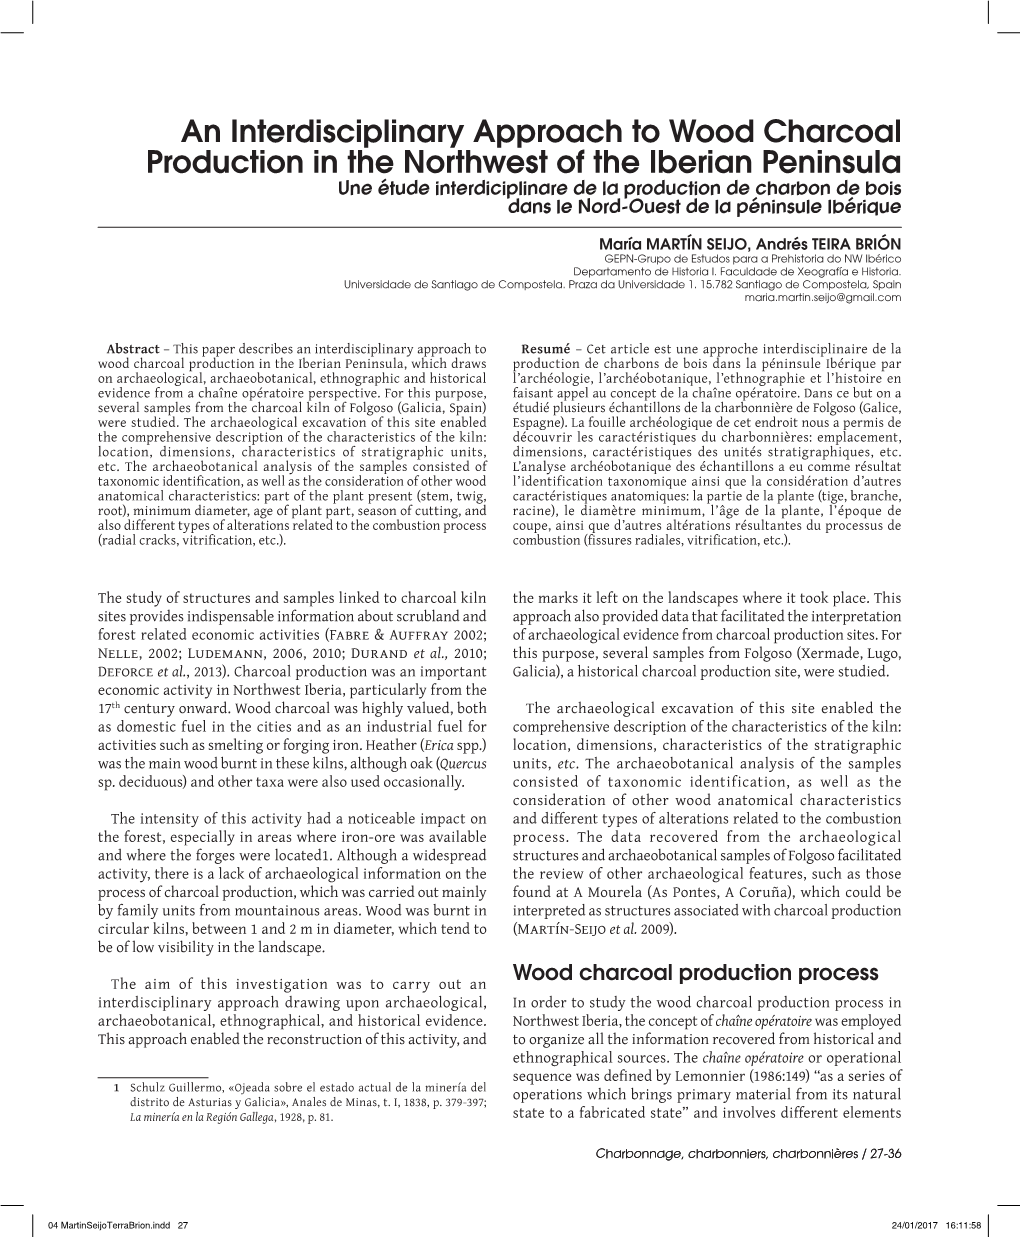 An Interdisciplinary Approach to Wood Charcoal Production in The